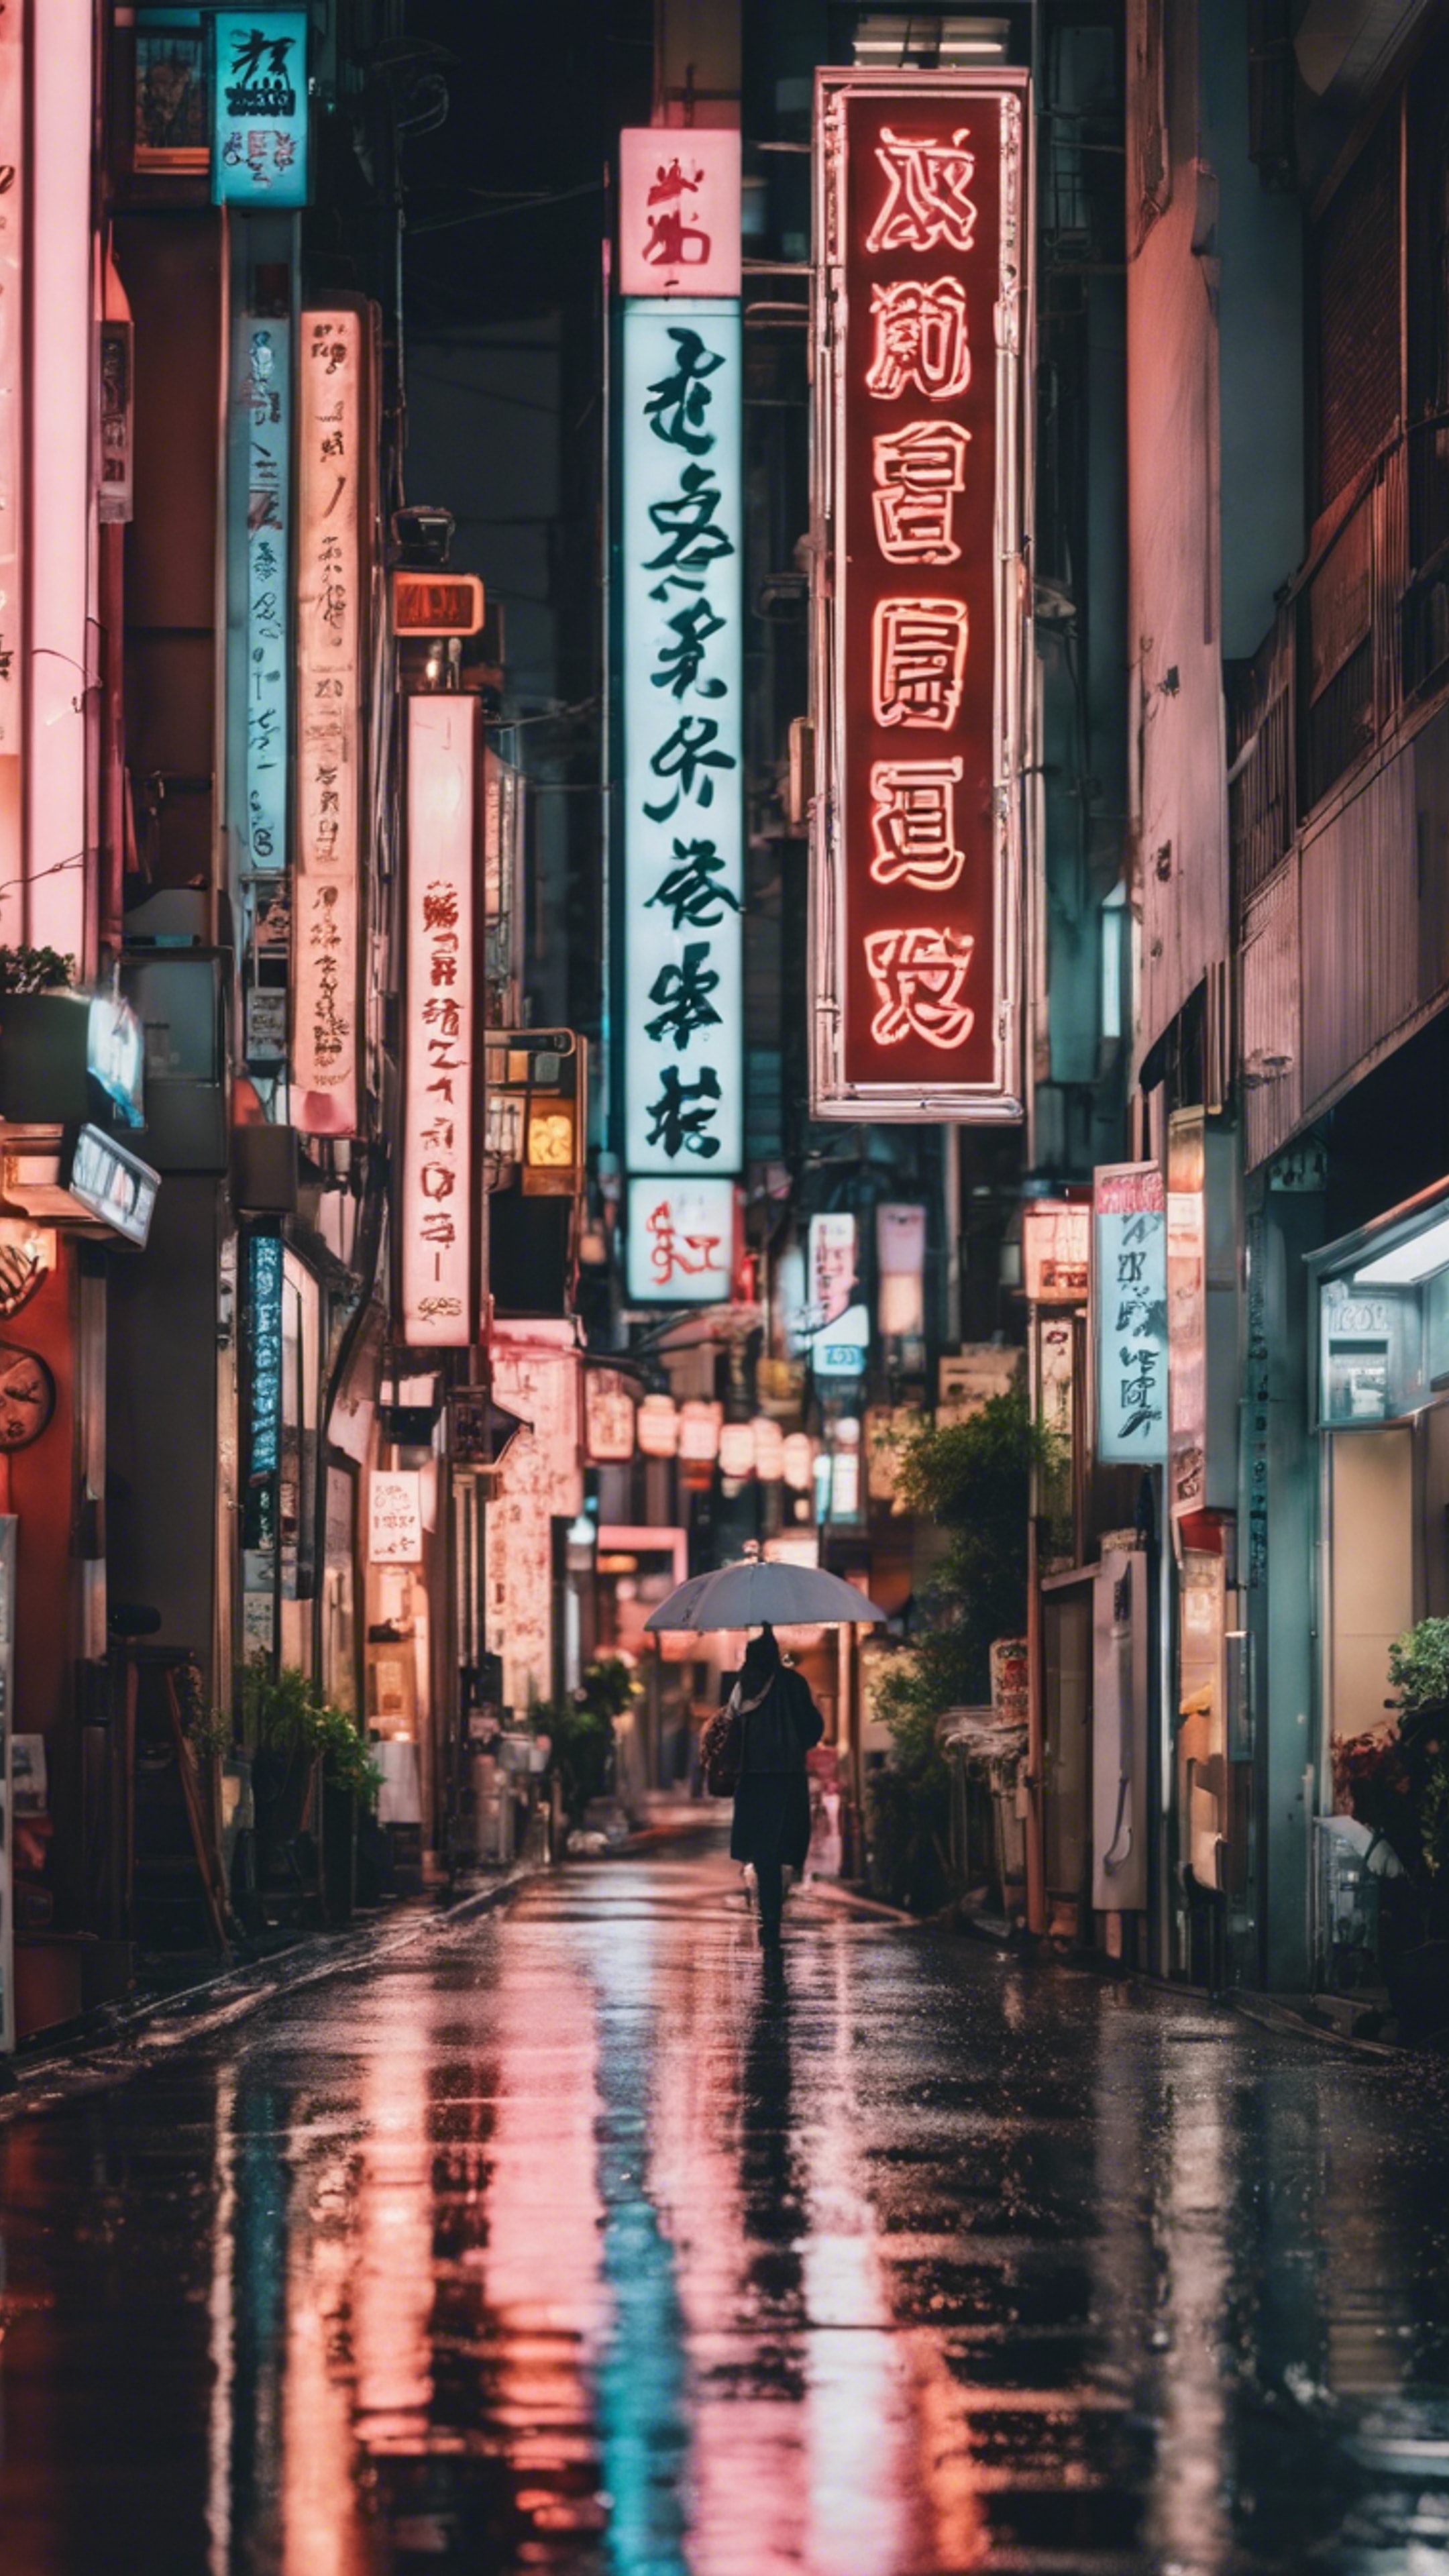 A trendy street in downtown Tokyo at dusk, lit by the neon signage of chic boutiques and popular cafés, reflecting off the wet pavement.壁紙[79ed9a41a09a4331bacf]